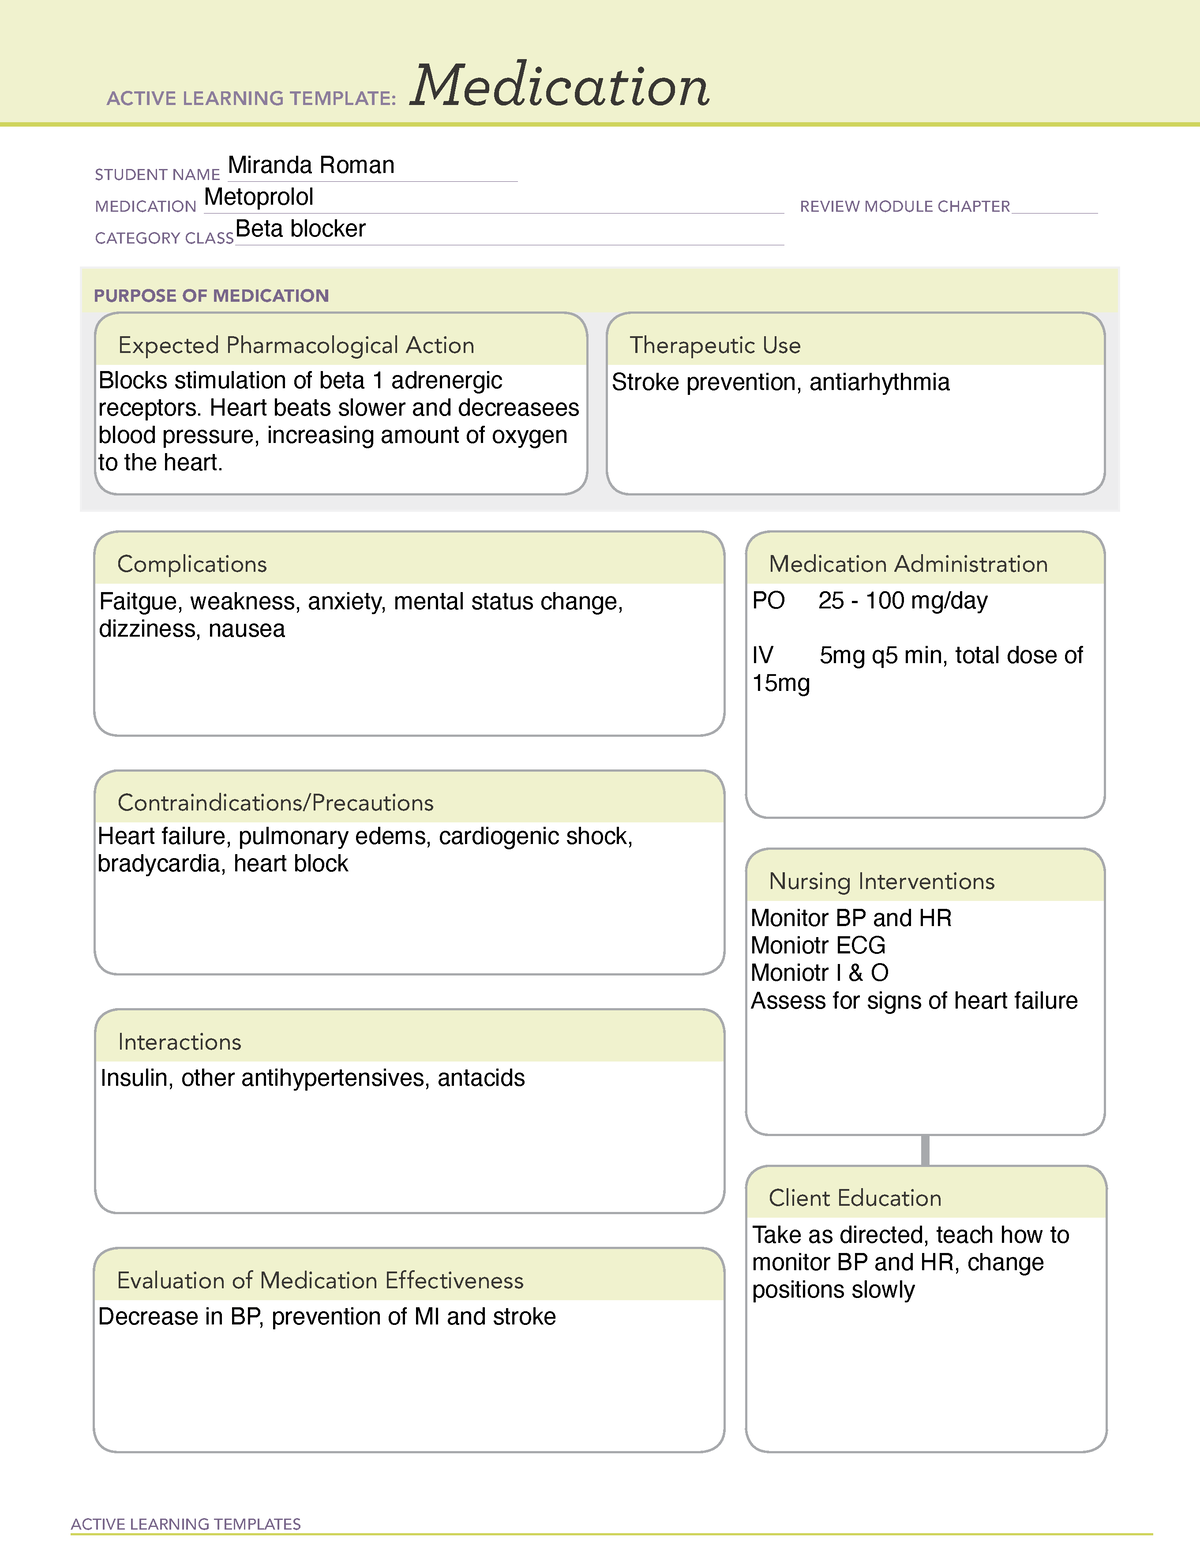 Metoprolol Med Template ACTIVE LEARNING TEMPLATES Medication STUDENT